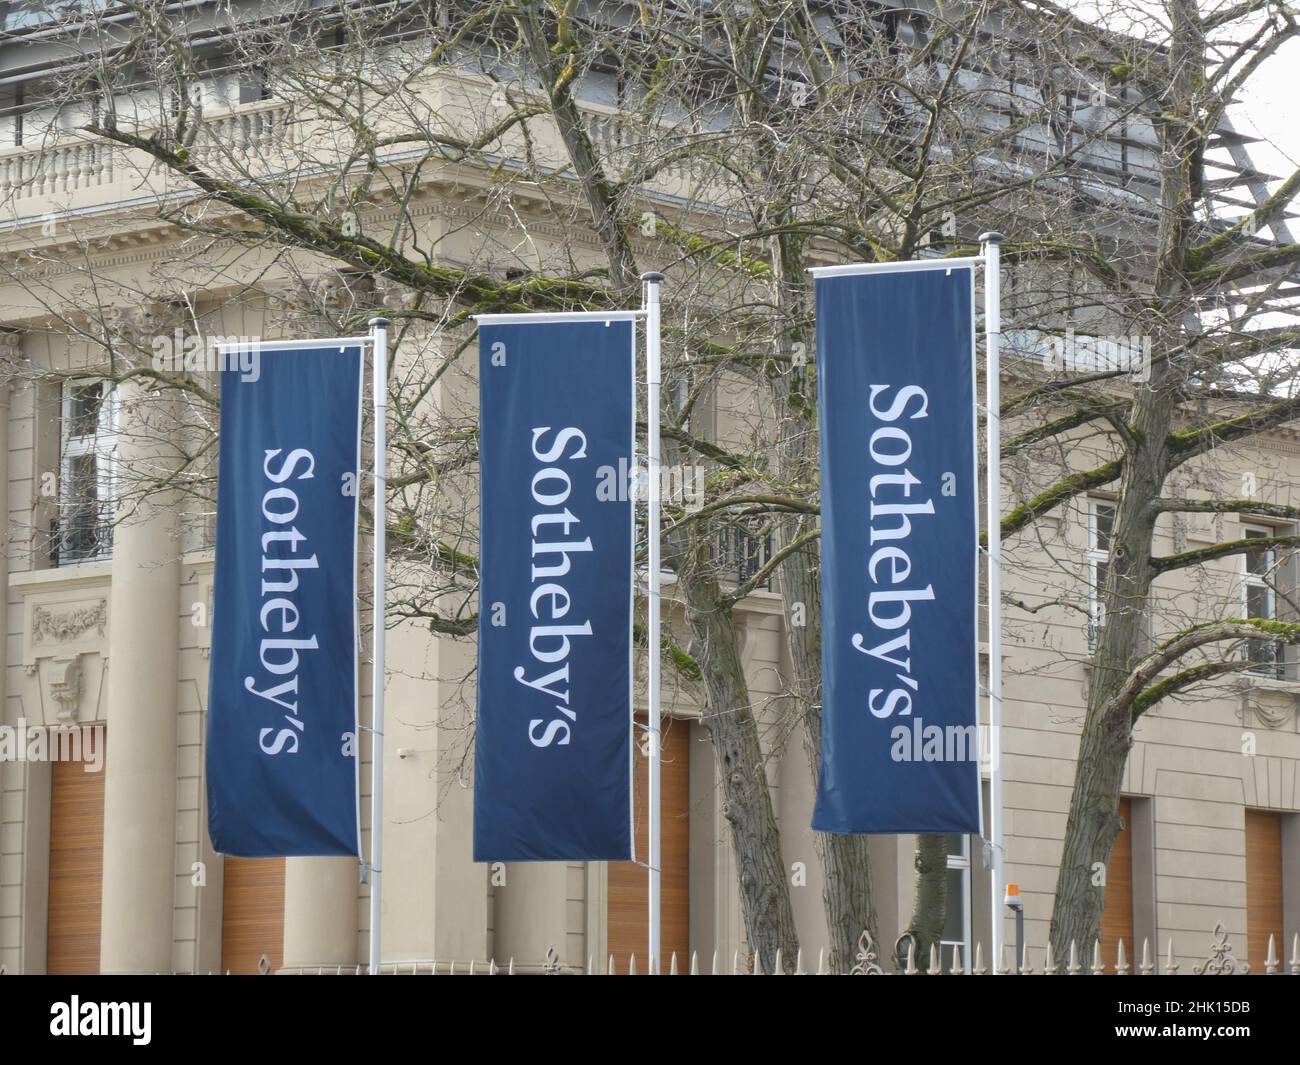 Cologne, Germany. 23rd Jan, 2022. Flags in front of the Cologne branch of Sotheby s auction house in the Palais du Rhin, also called Palais or Villa Oppenheim, a palatial neo-rococo building built in 1908 in the Bayenthal district of Cologne. Sotheby's headquarters in Germany Credit: Horst Galuschka/dpa/Alamy Live News Stock Photo